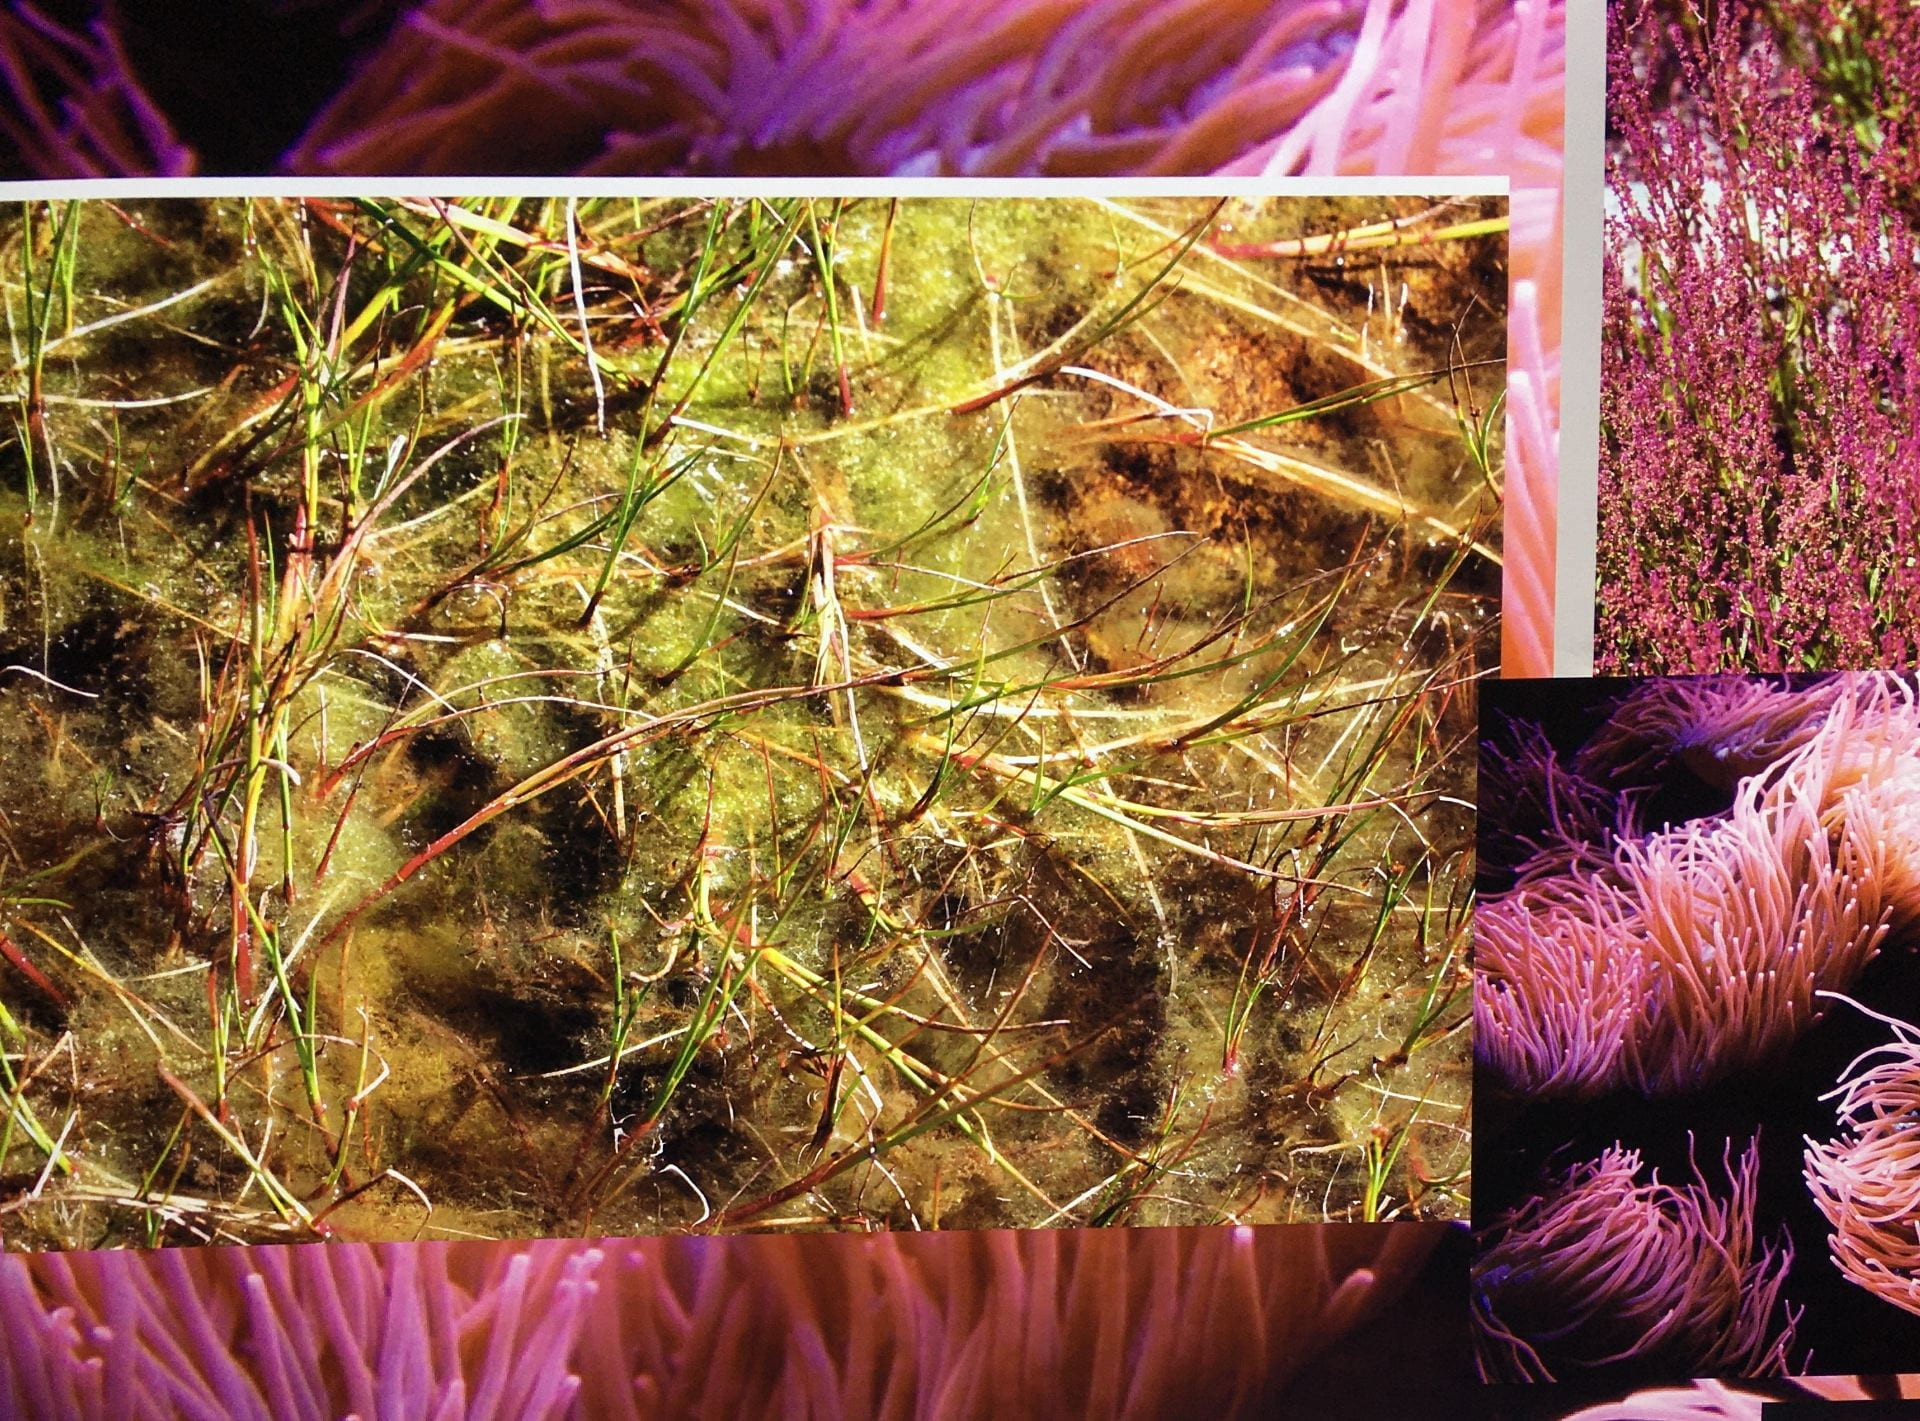 A collage of images. In the background is a closeup of pink sea anemones. In the foreground is a closeup of green moss.